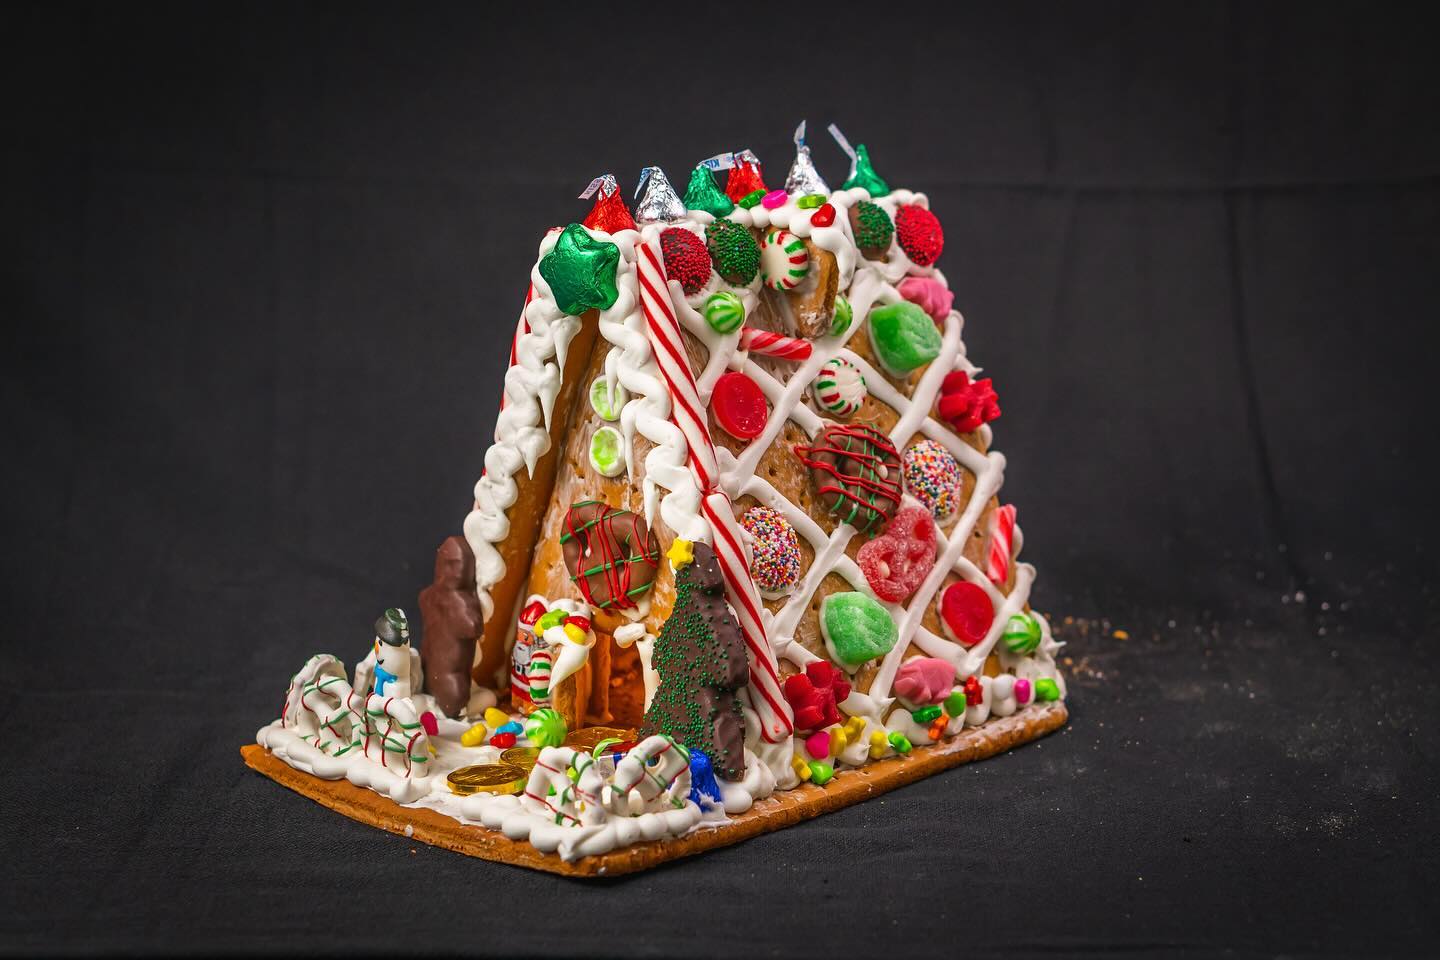 A gingerbread house decorated with candy and decorations.